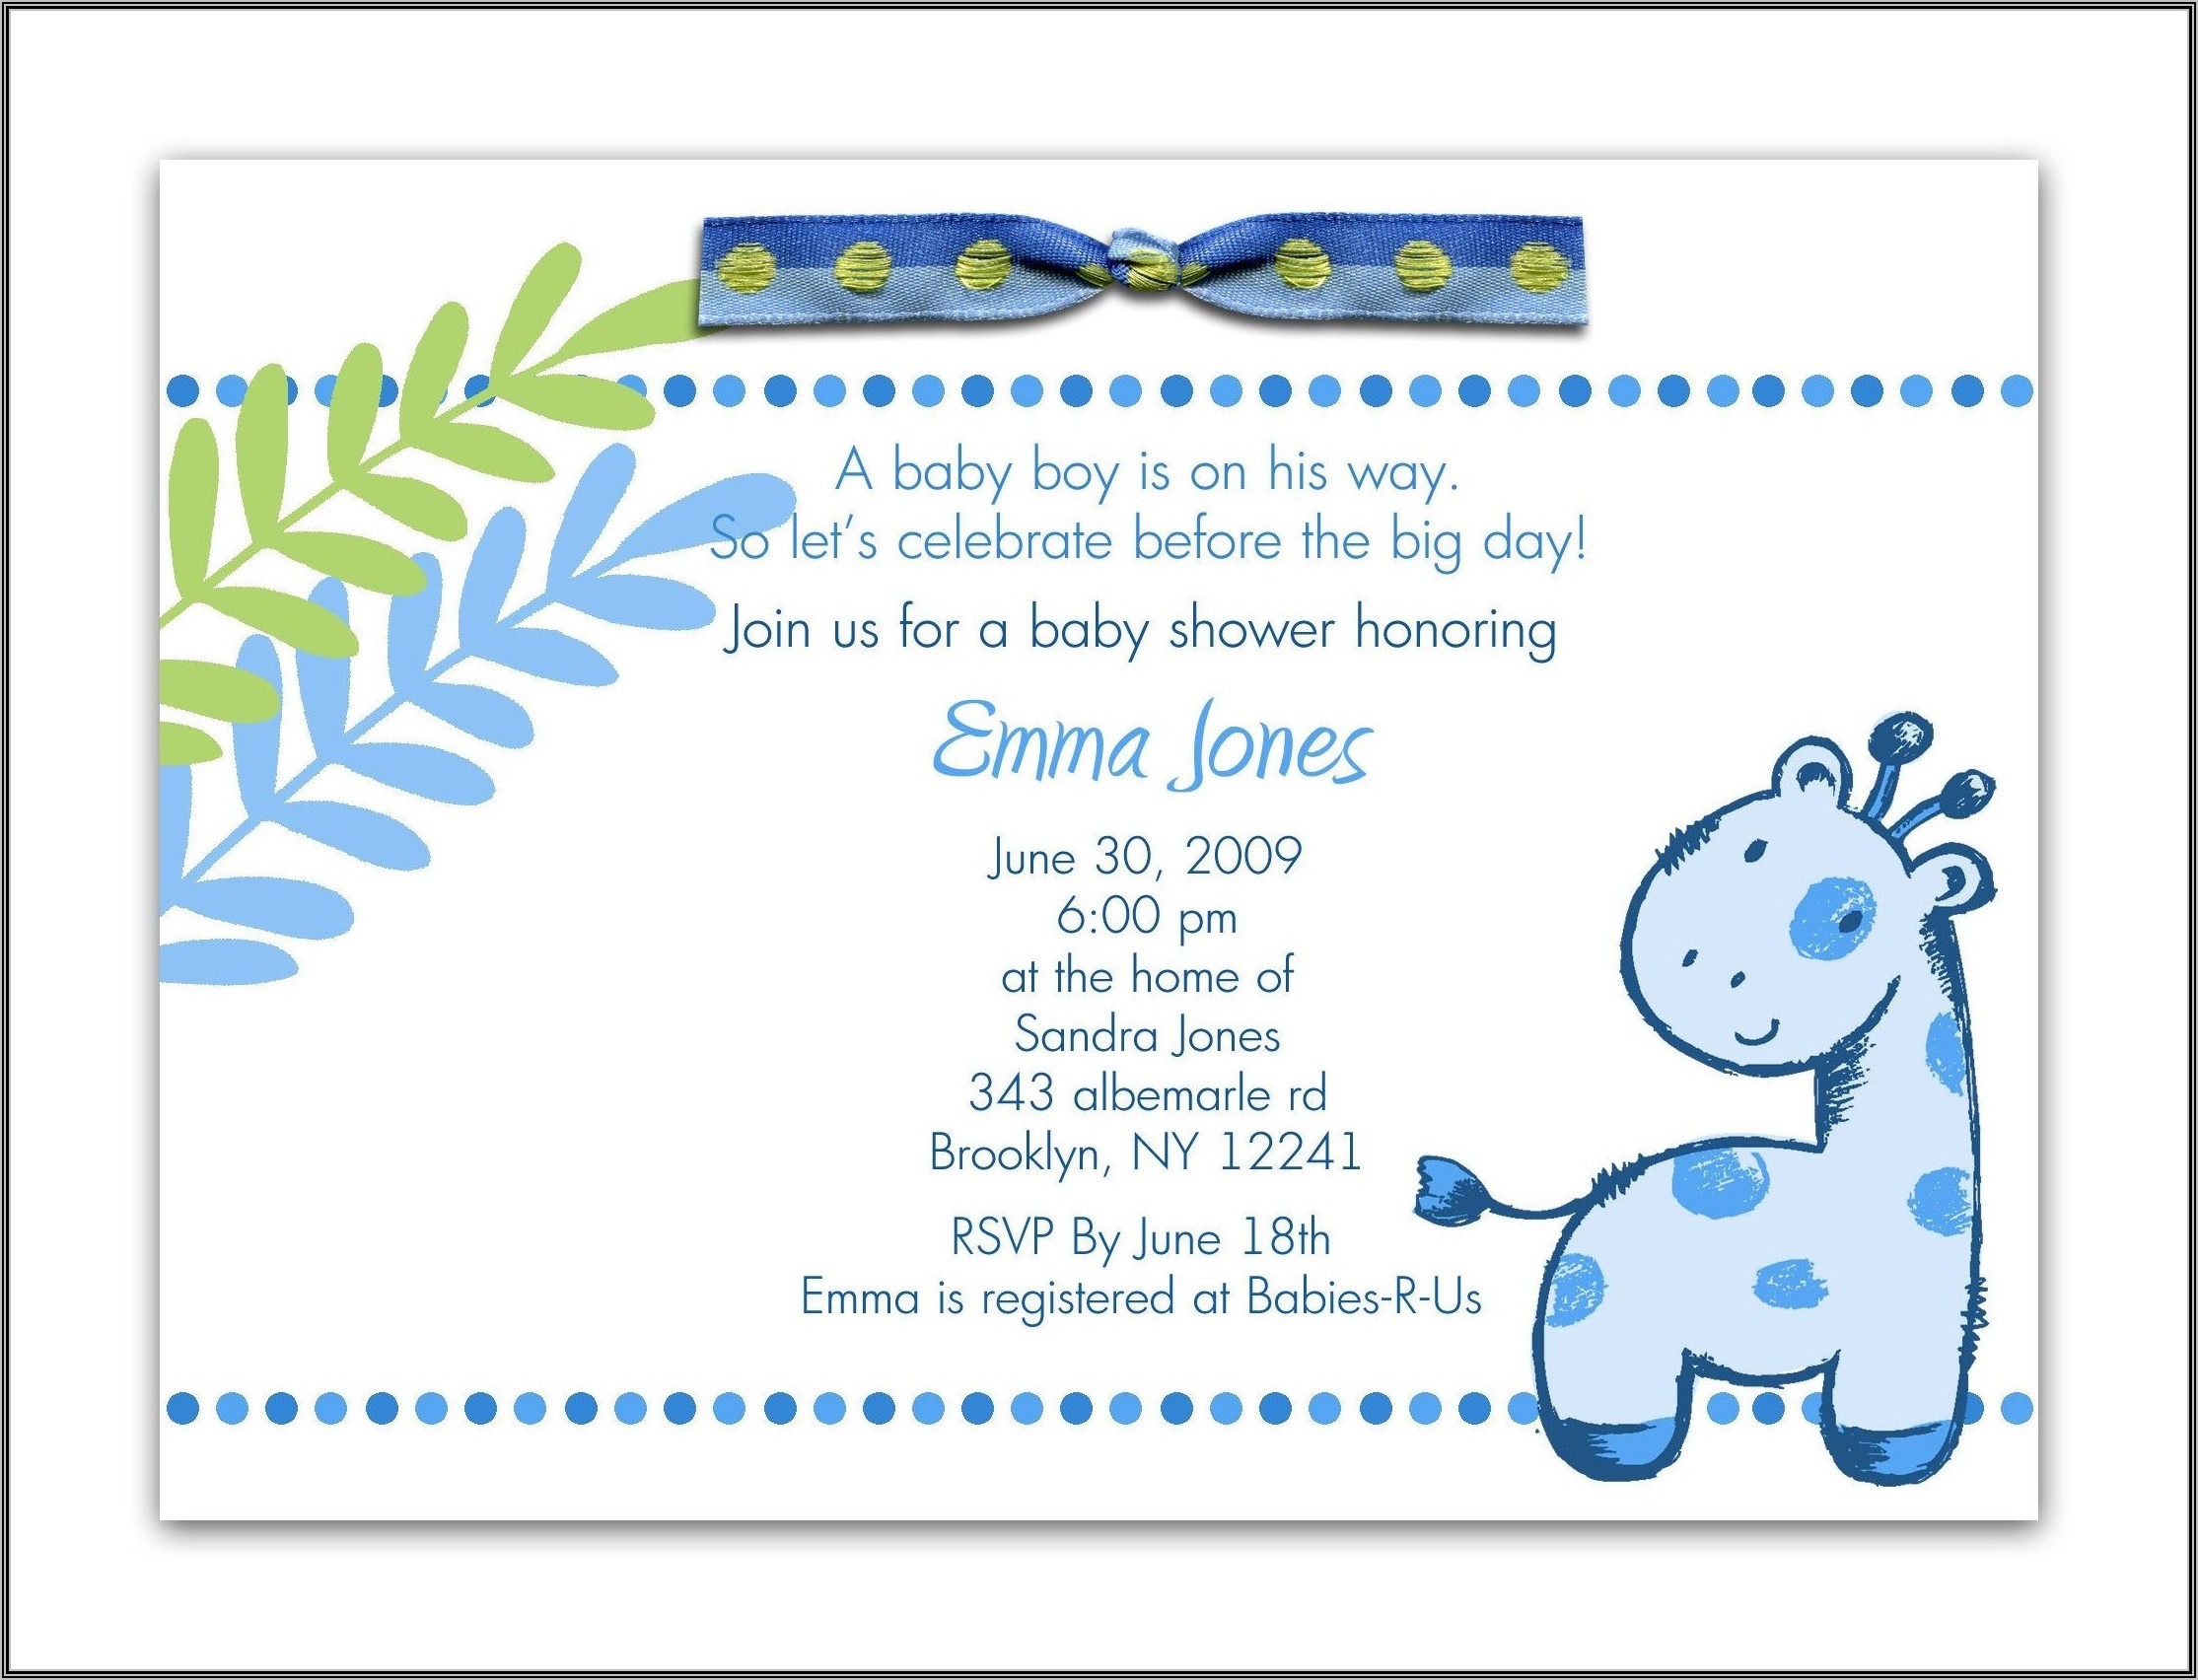 Baby Shower Welcome Sign Templates Free Printable